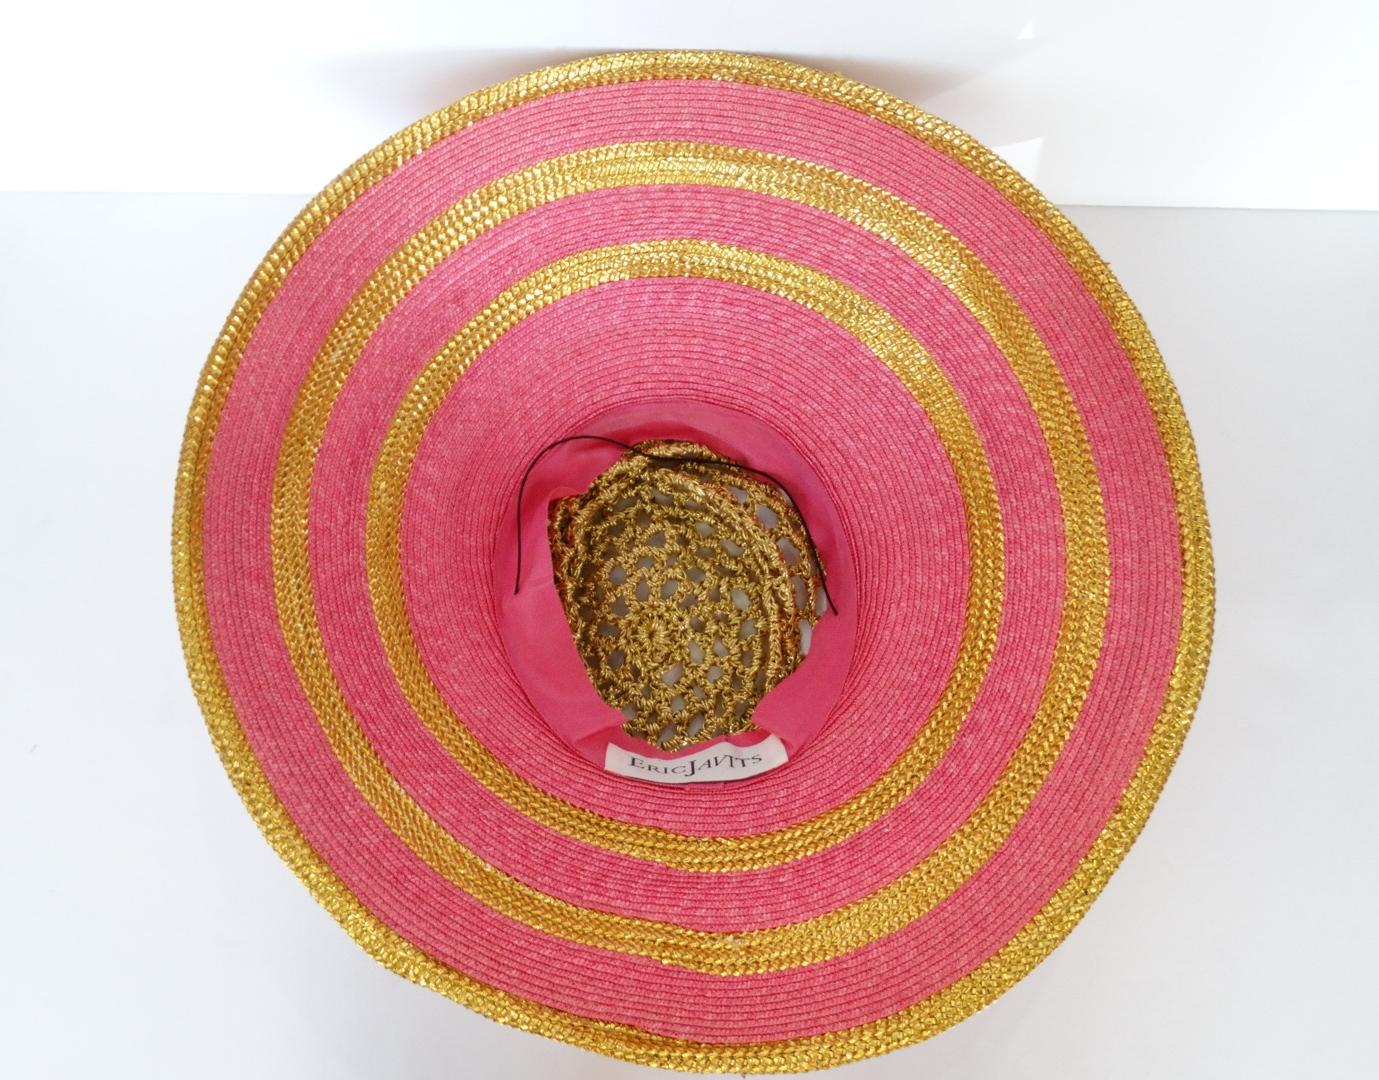 Eric Javits Pink and Gold Metallic Striped Crochet Crown Hat For Sale ...